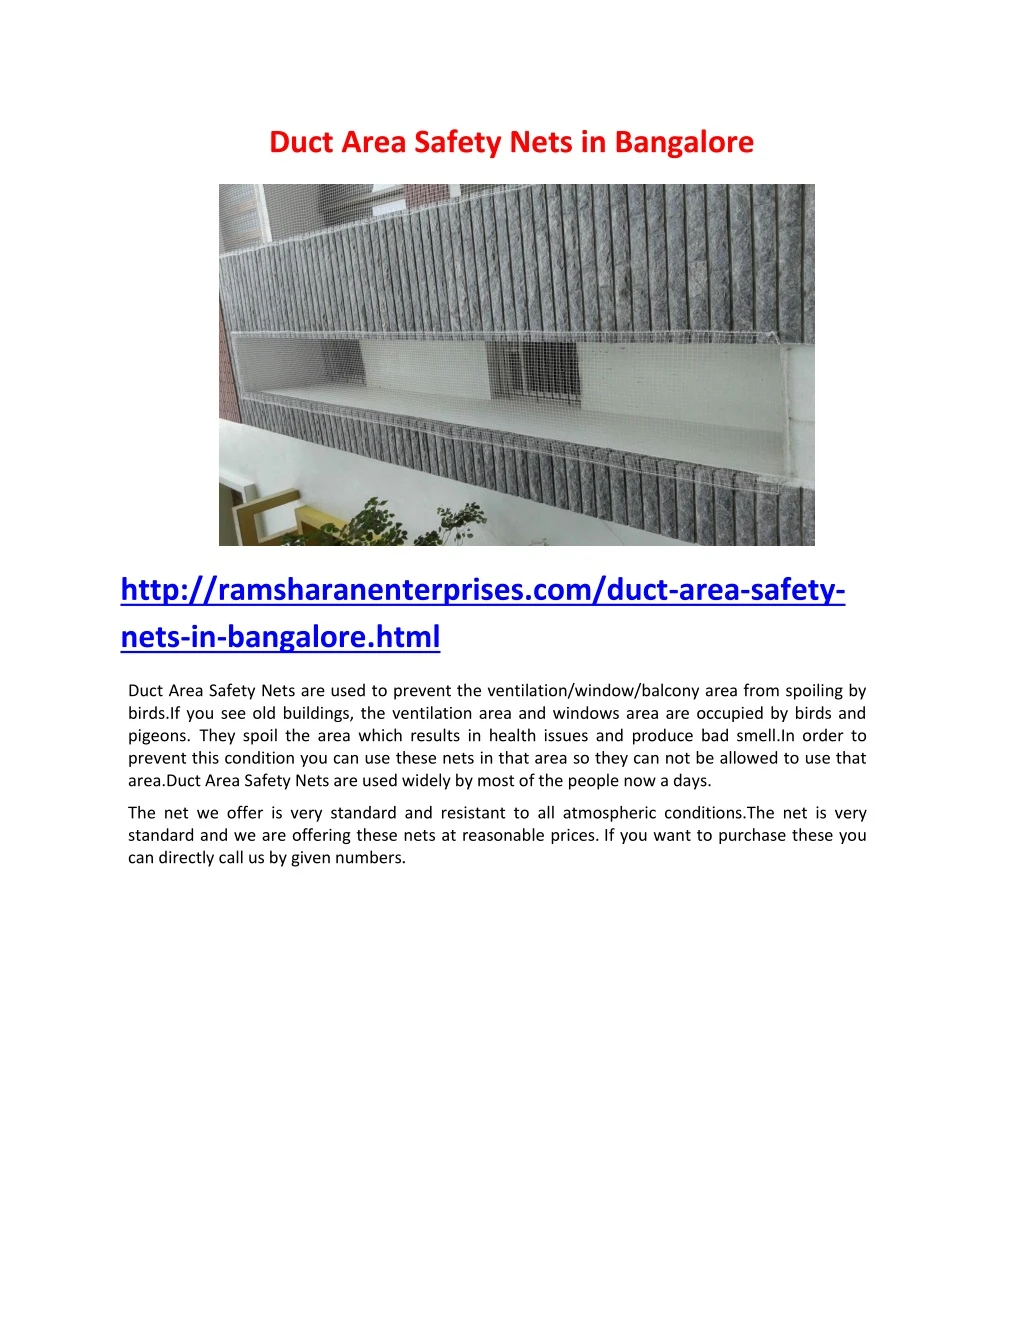 duct area safety nets in bangalore